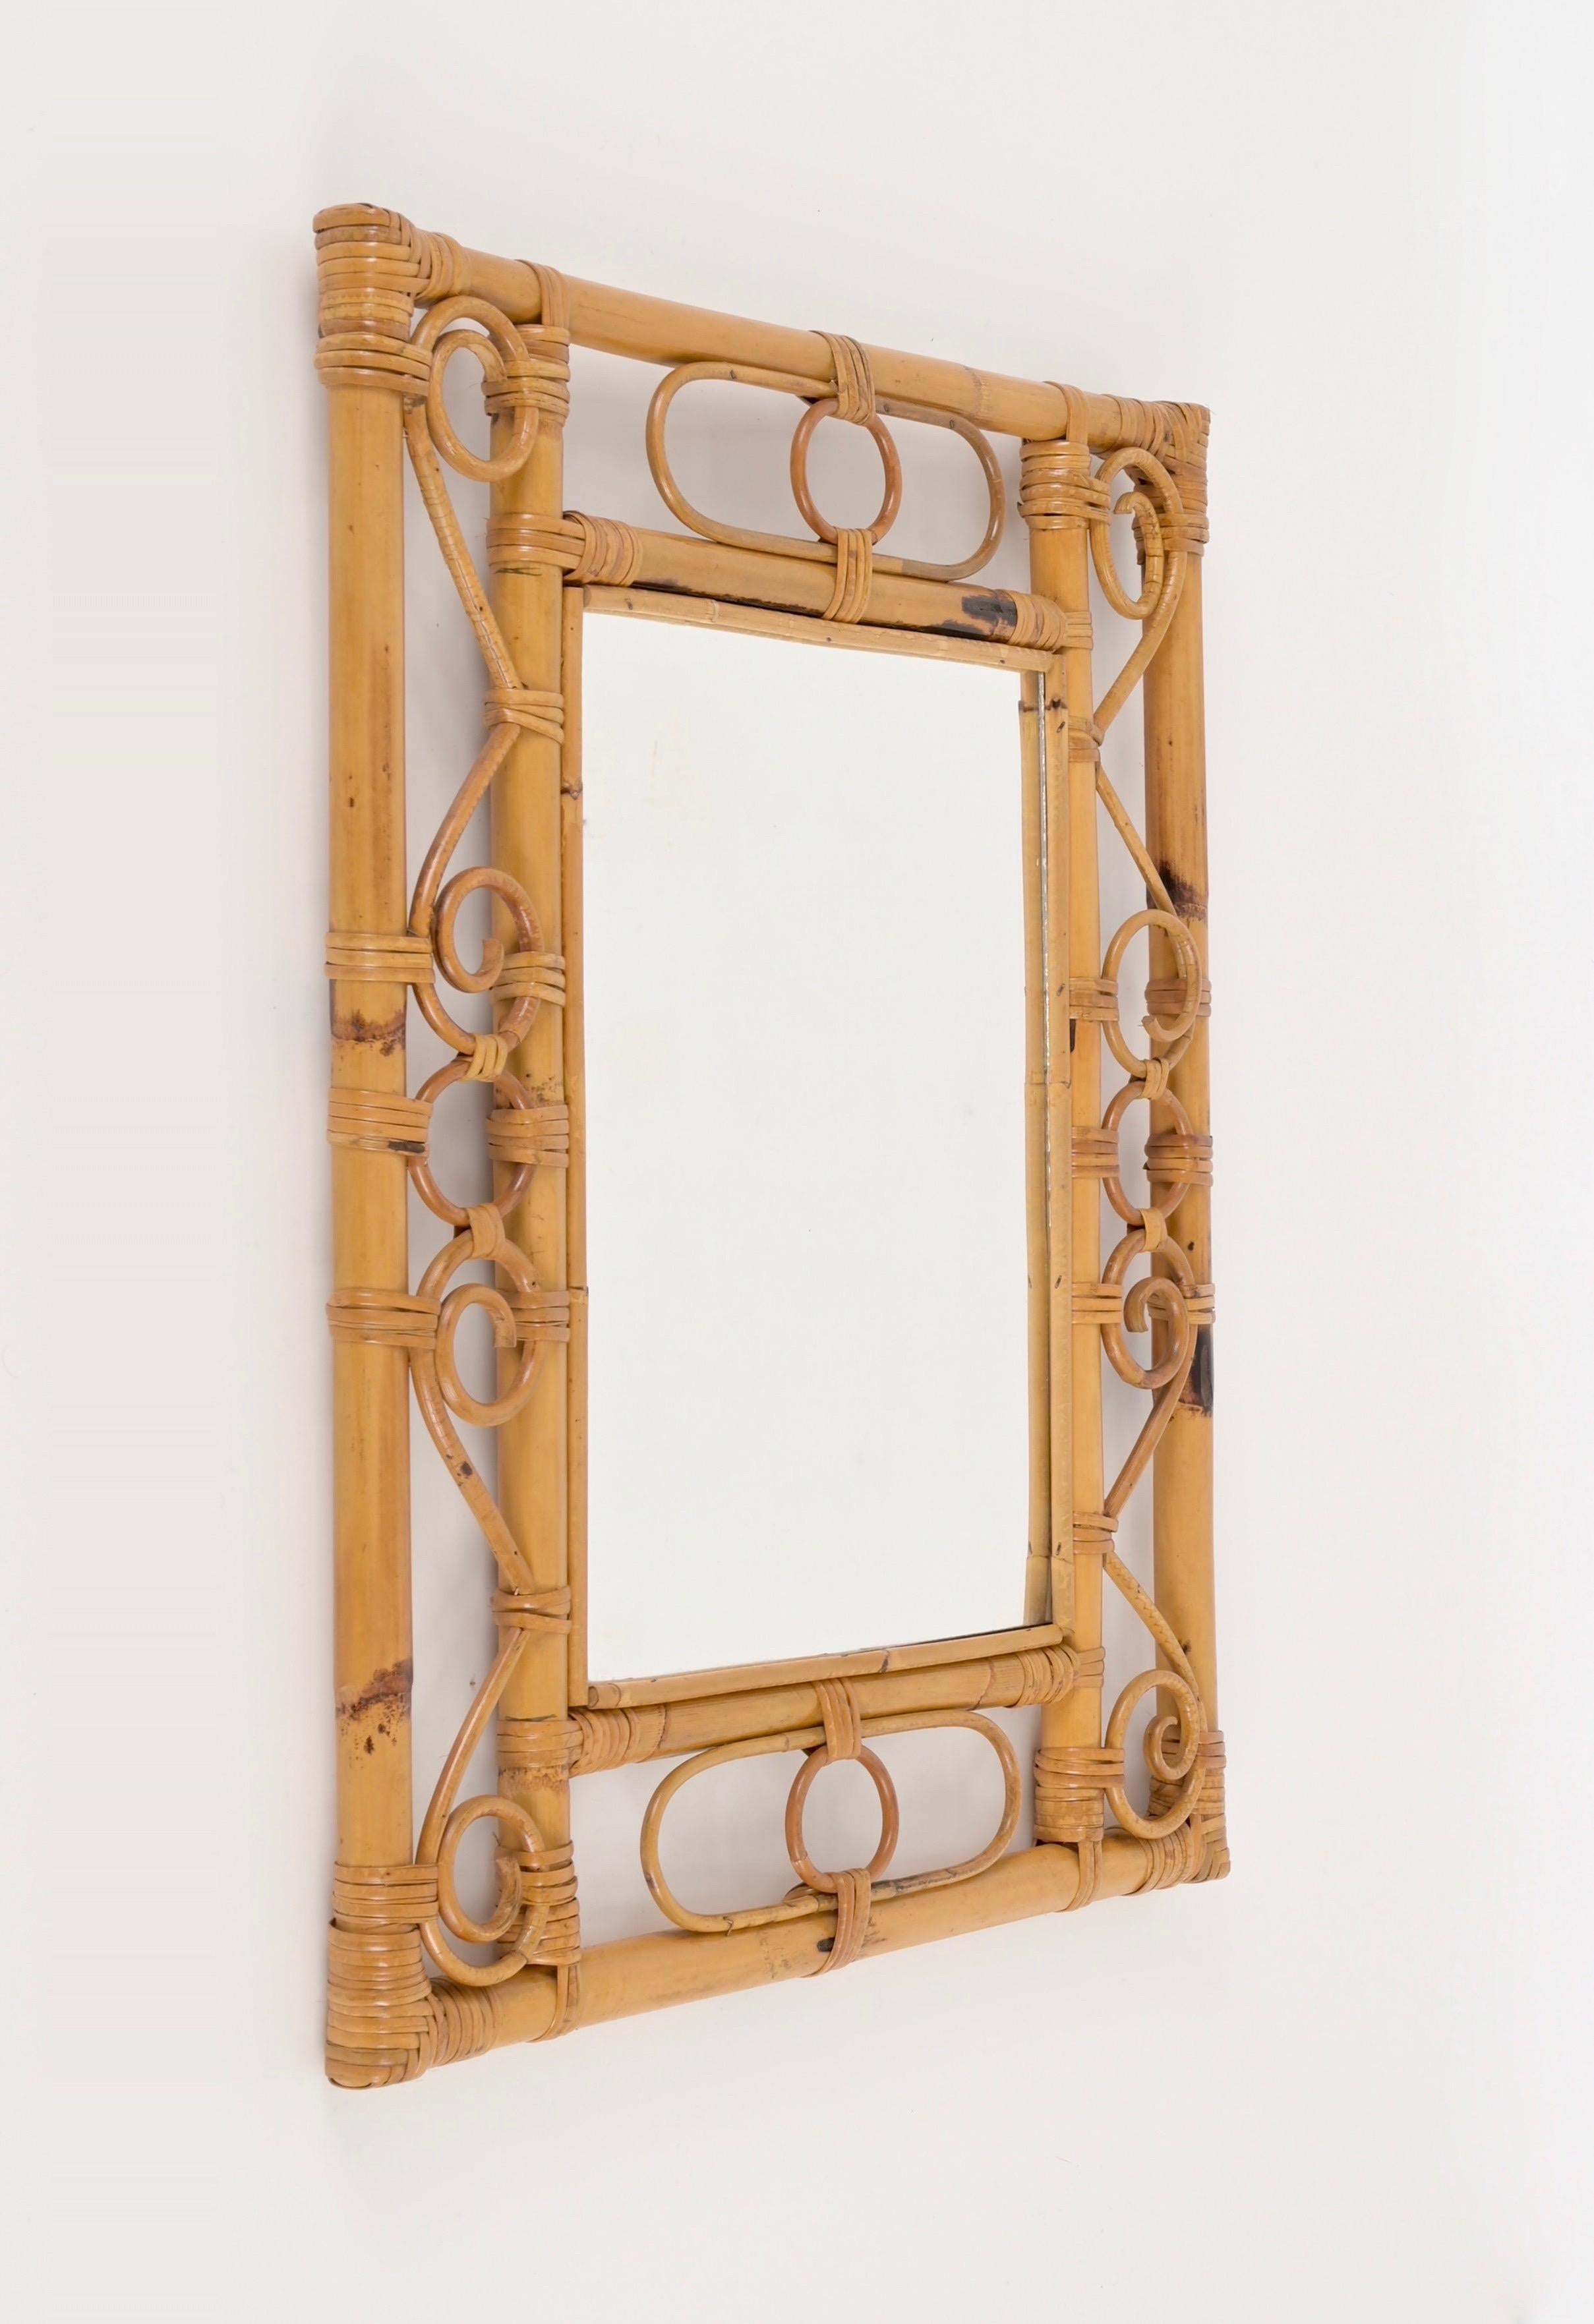 Midcentury French Riviera Bamboo, Rattan, Wicker Rectangular Mirror, Italy 1960s For Sale 1